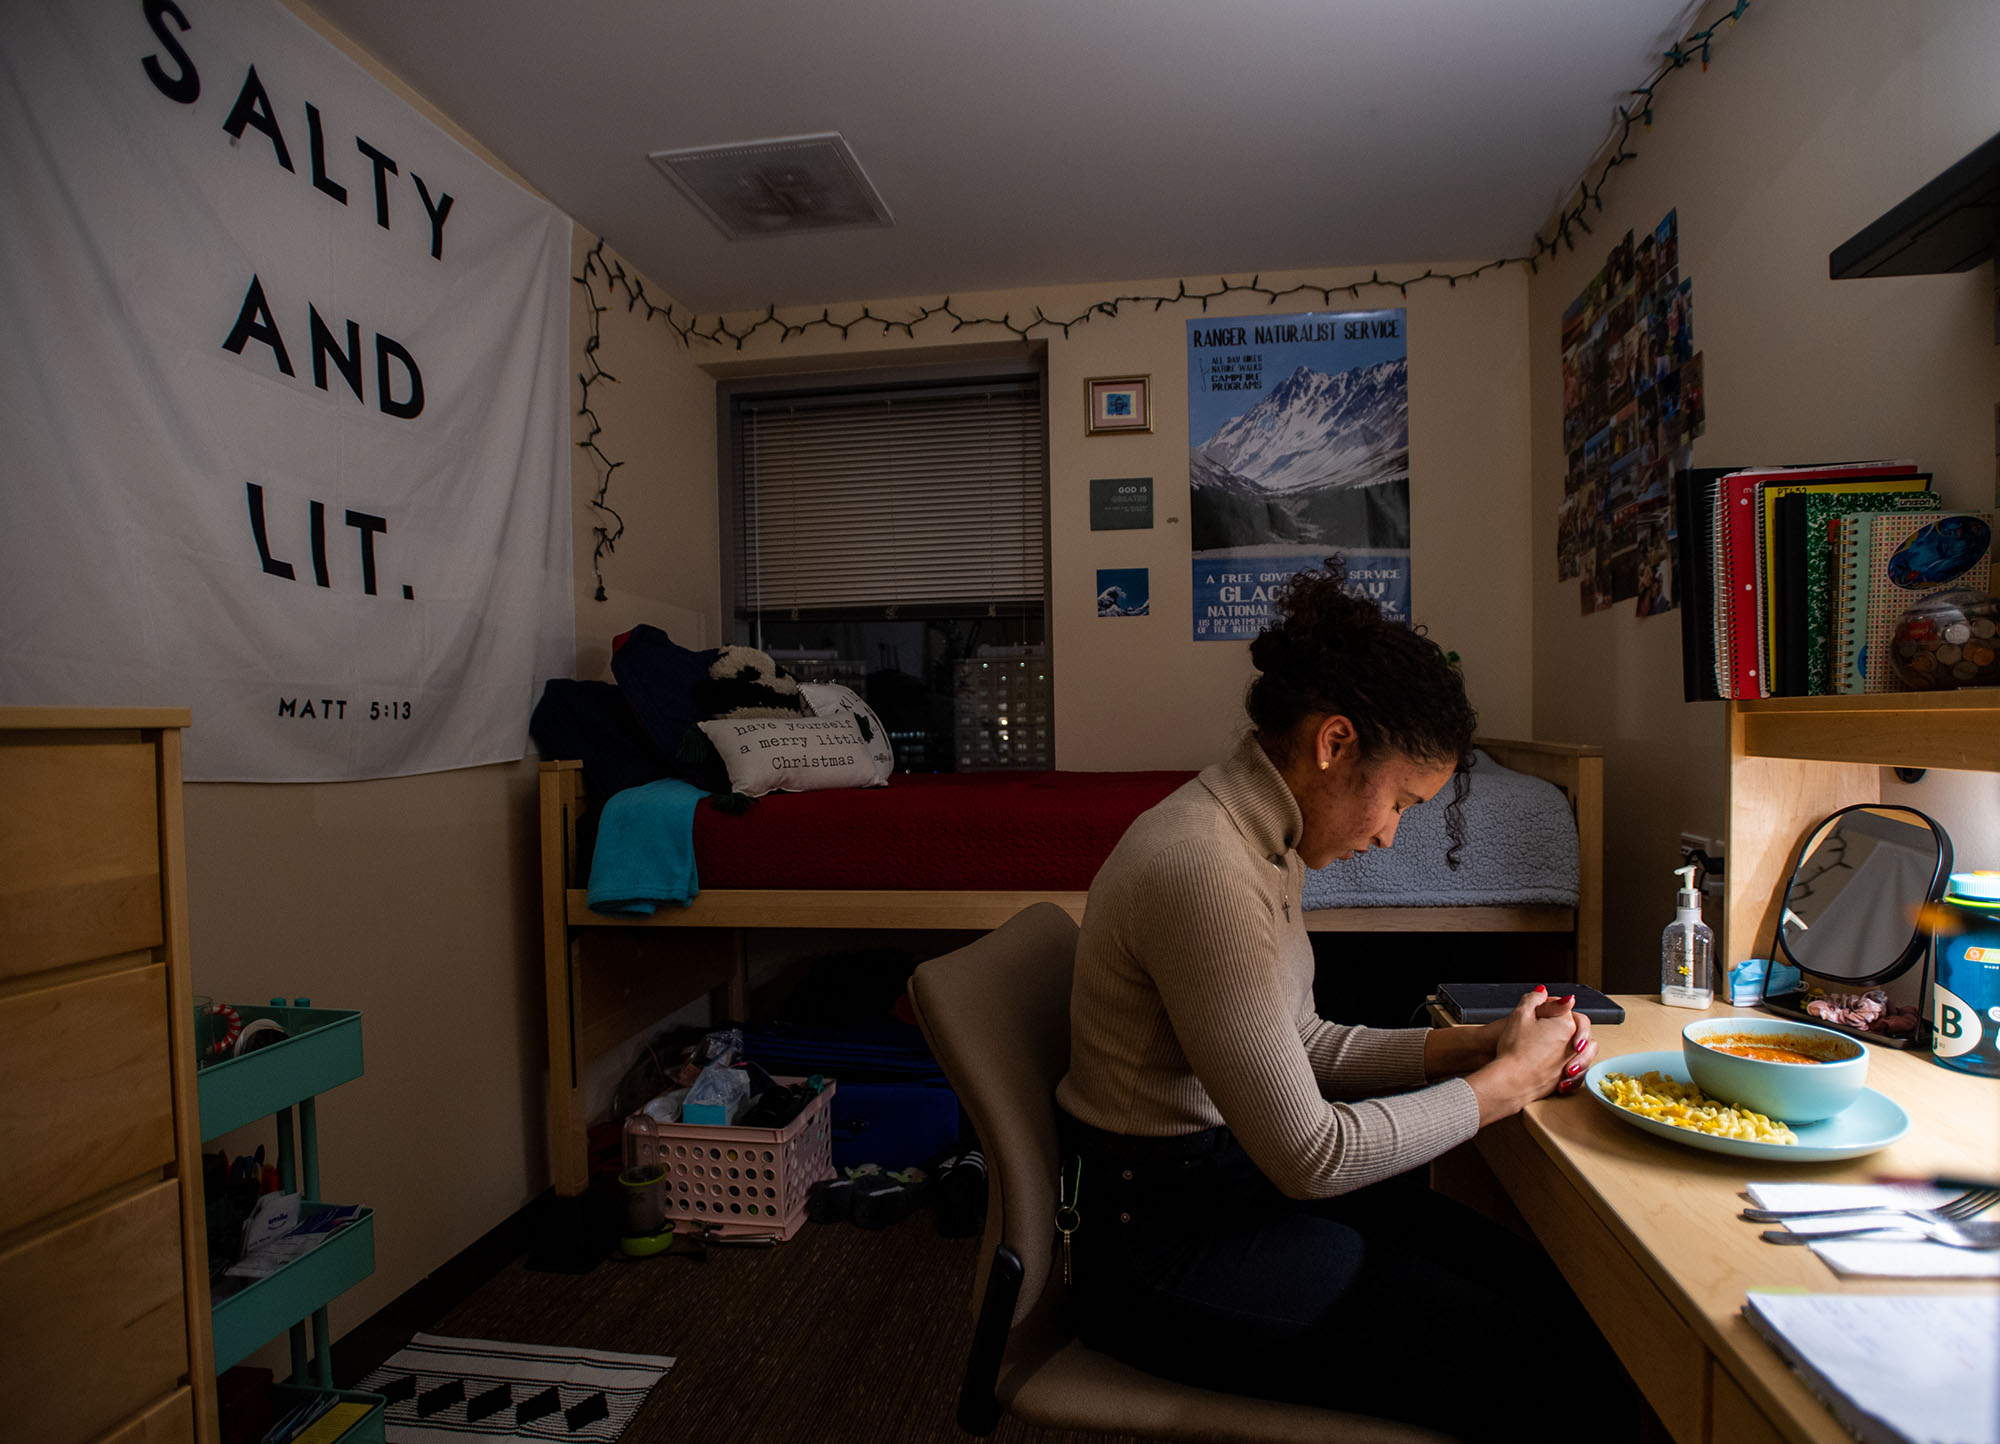 Emily Manz (SAR’23) says grace over her dinner in her Stuvi2 apartment. A tan young woman with black curly hair bows her head over her clasped hands as she sits at her desk in her dorm room.